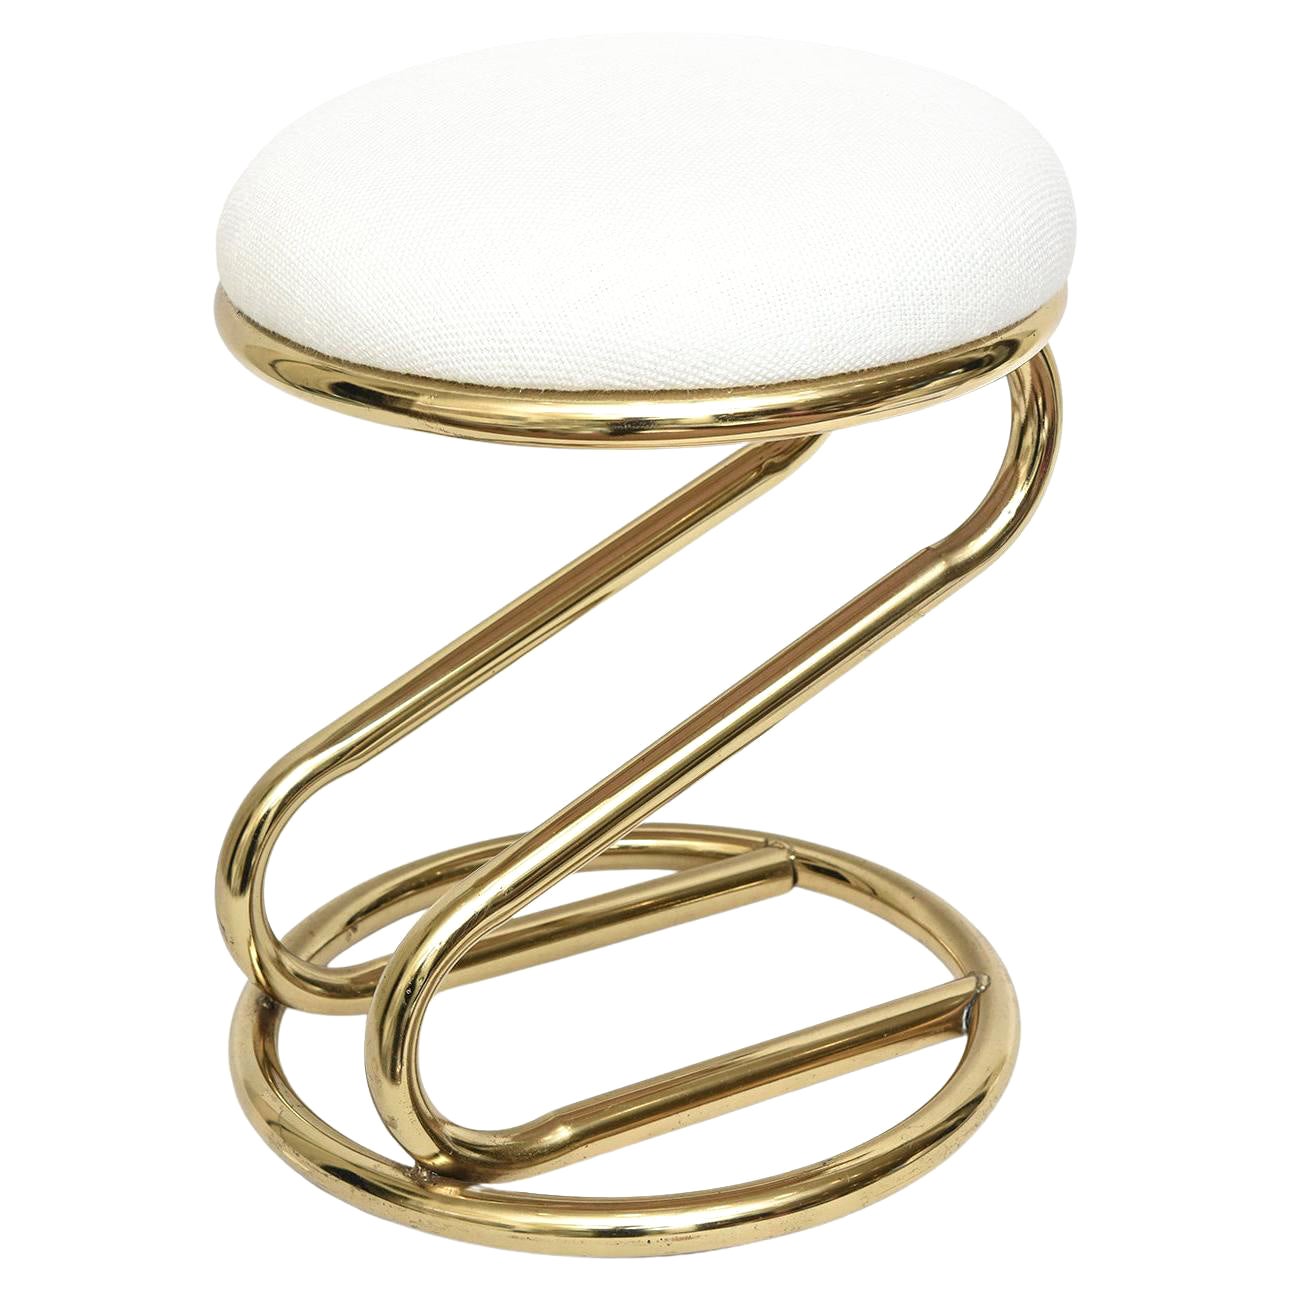 Vintage Brass over Steel and White Upholstered Zig Zag Stool